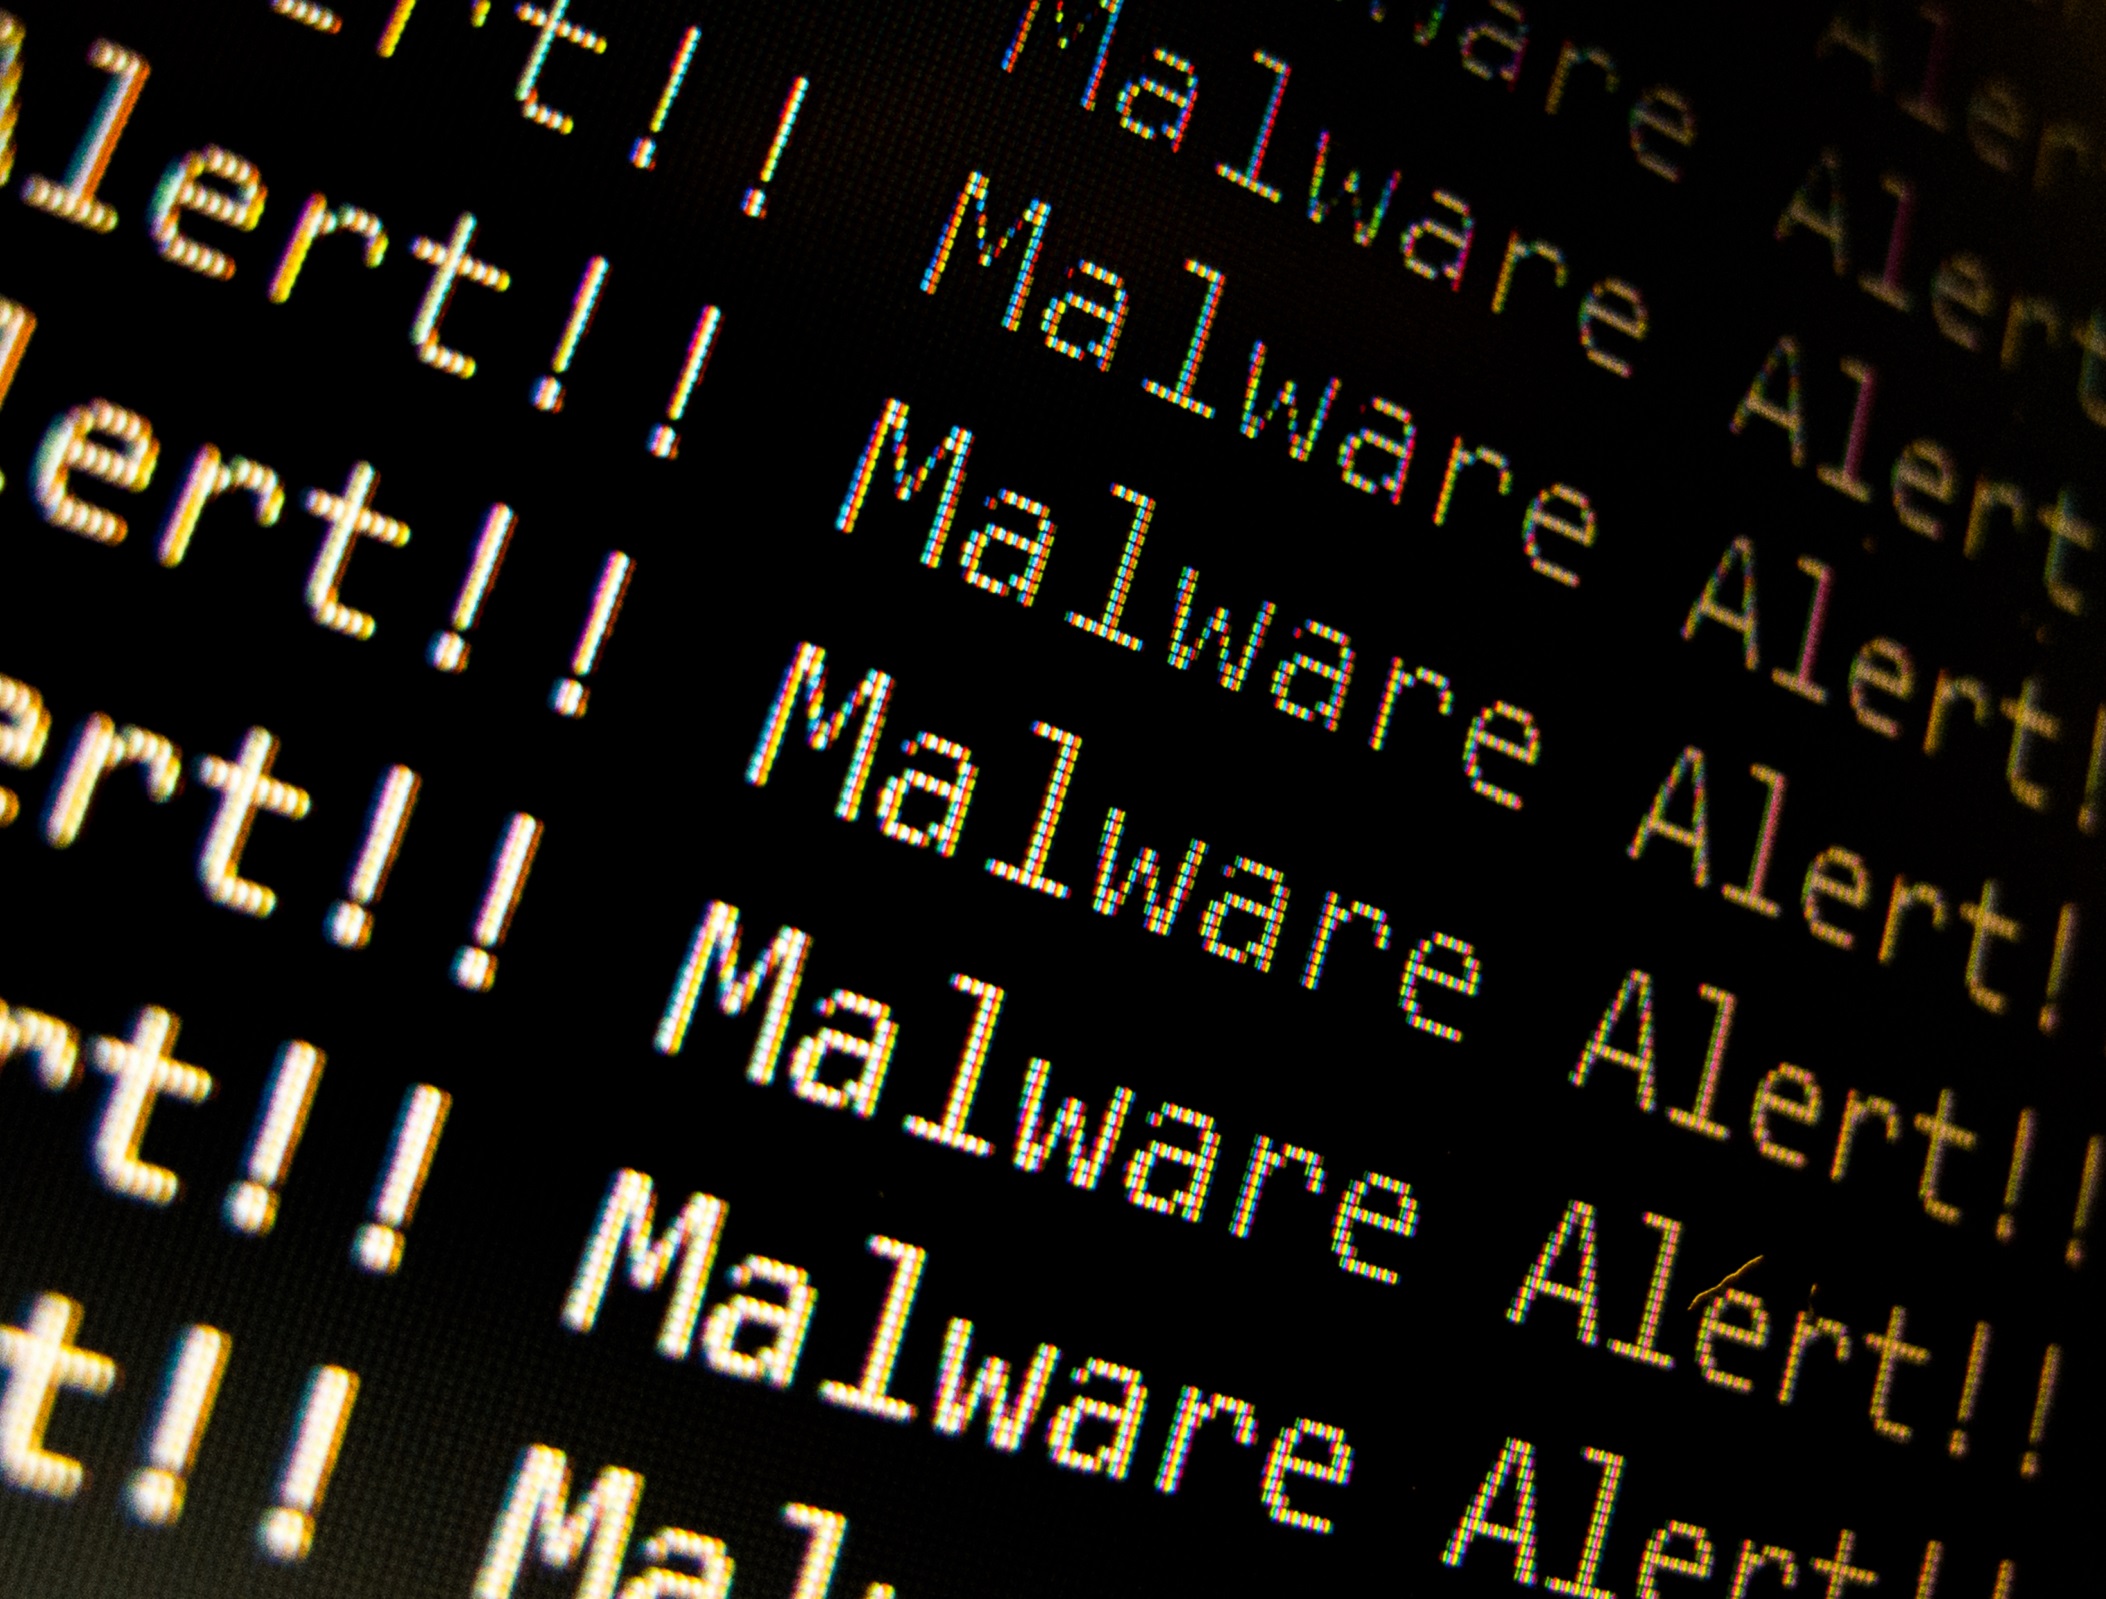 Over 95 per cent of 2022’s new malware threats aimed at Windows